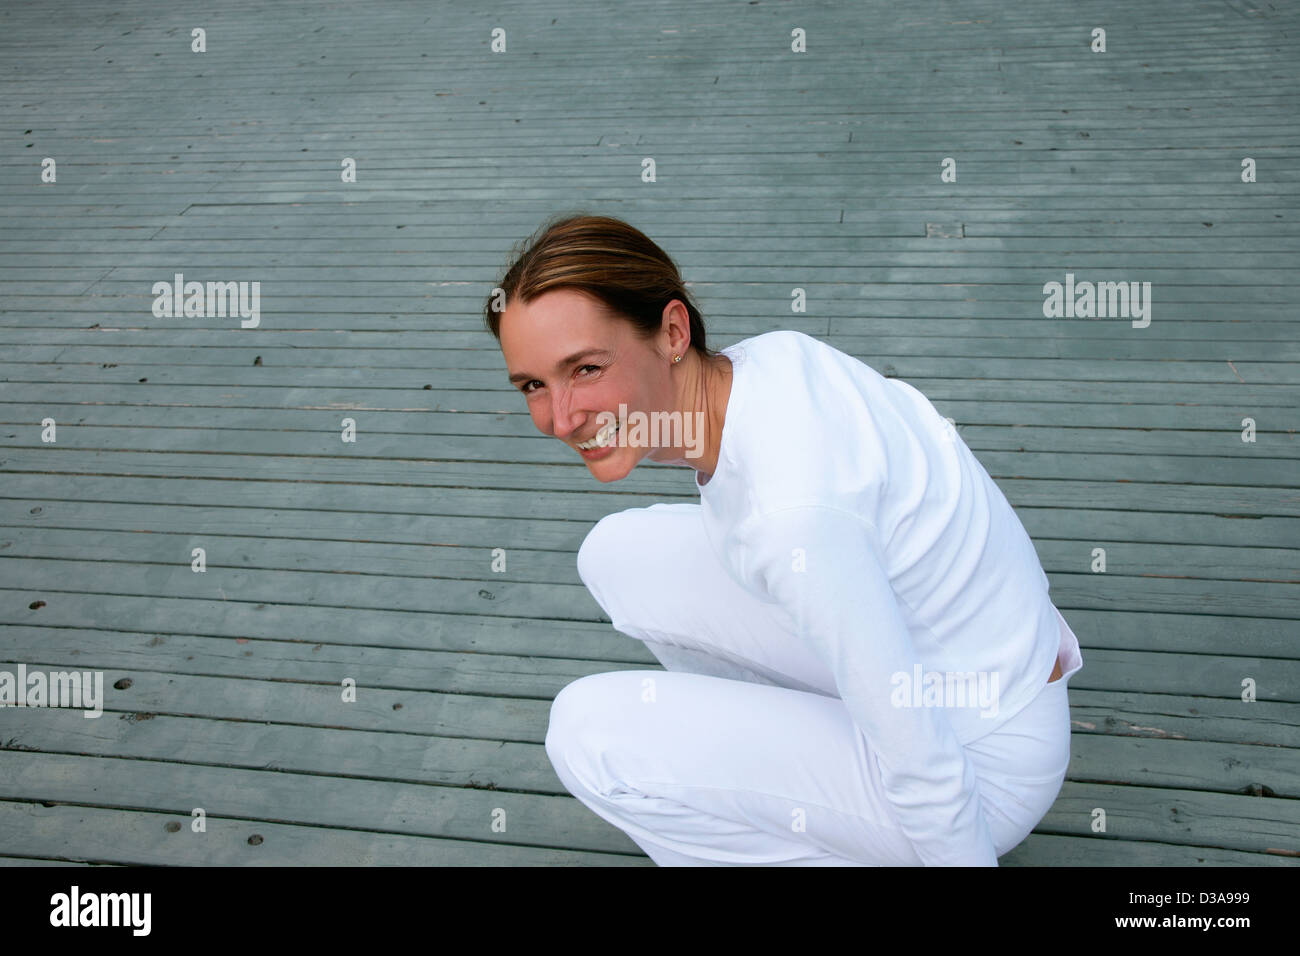 Woman crouching on wooden deck Stock Photo